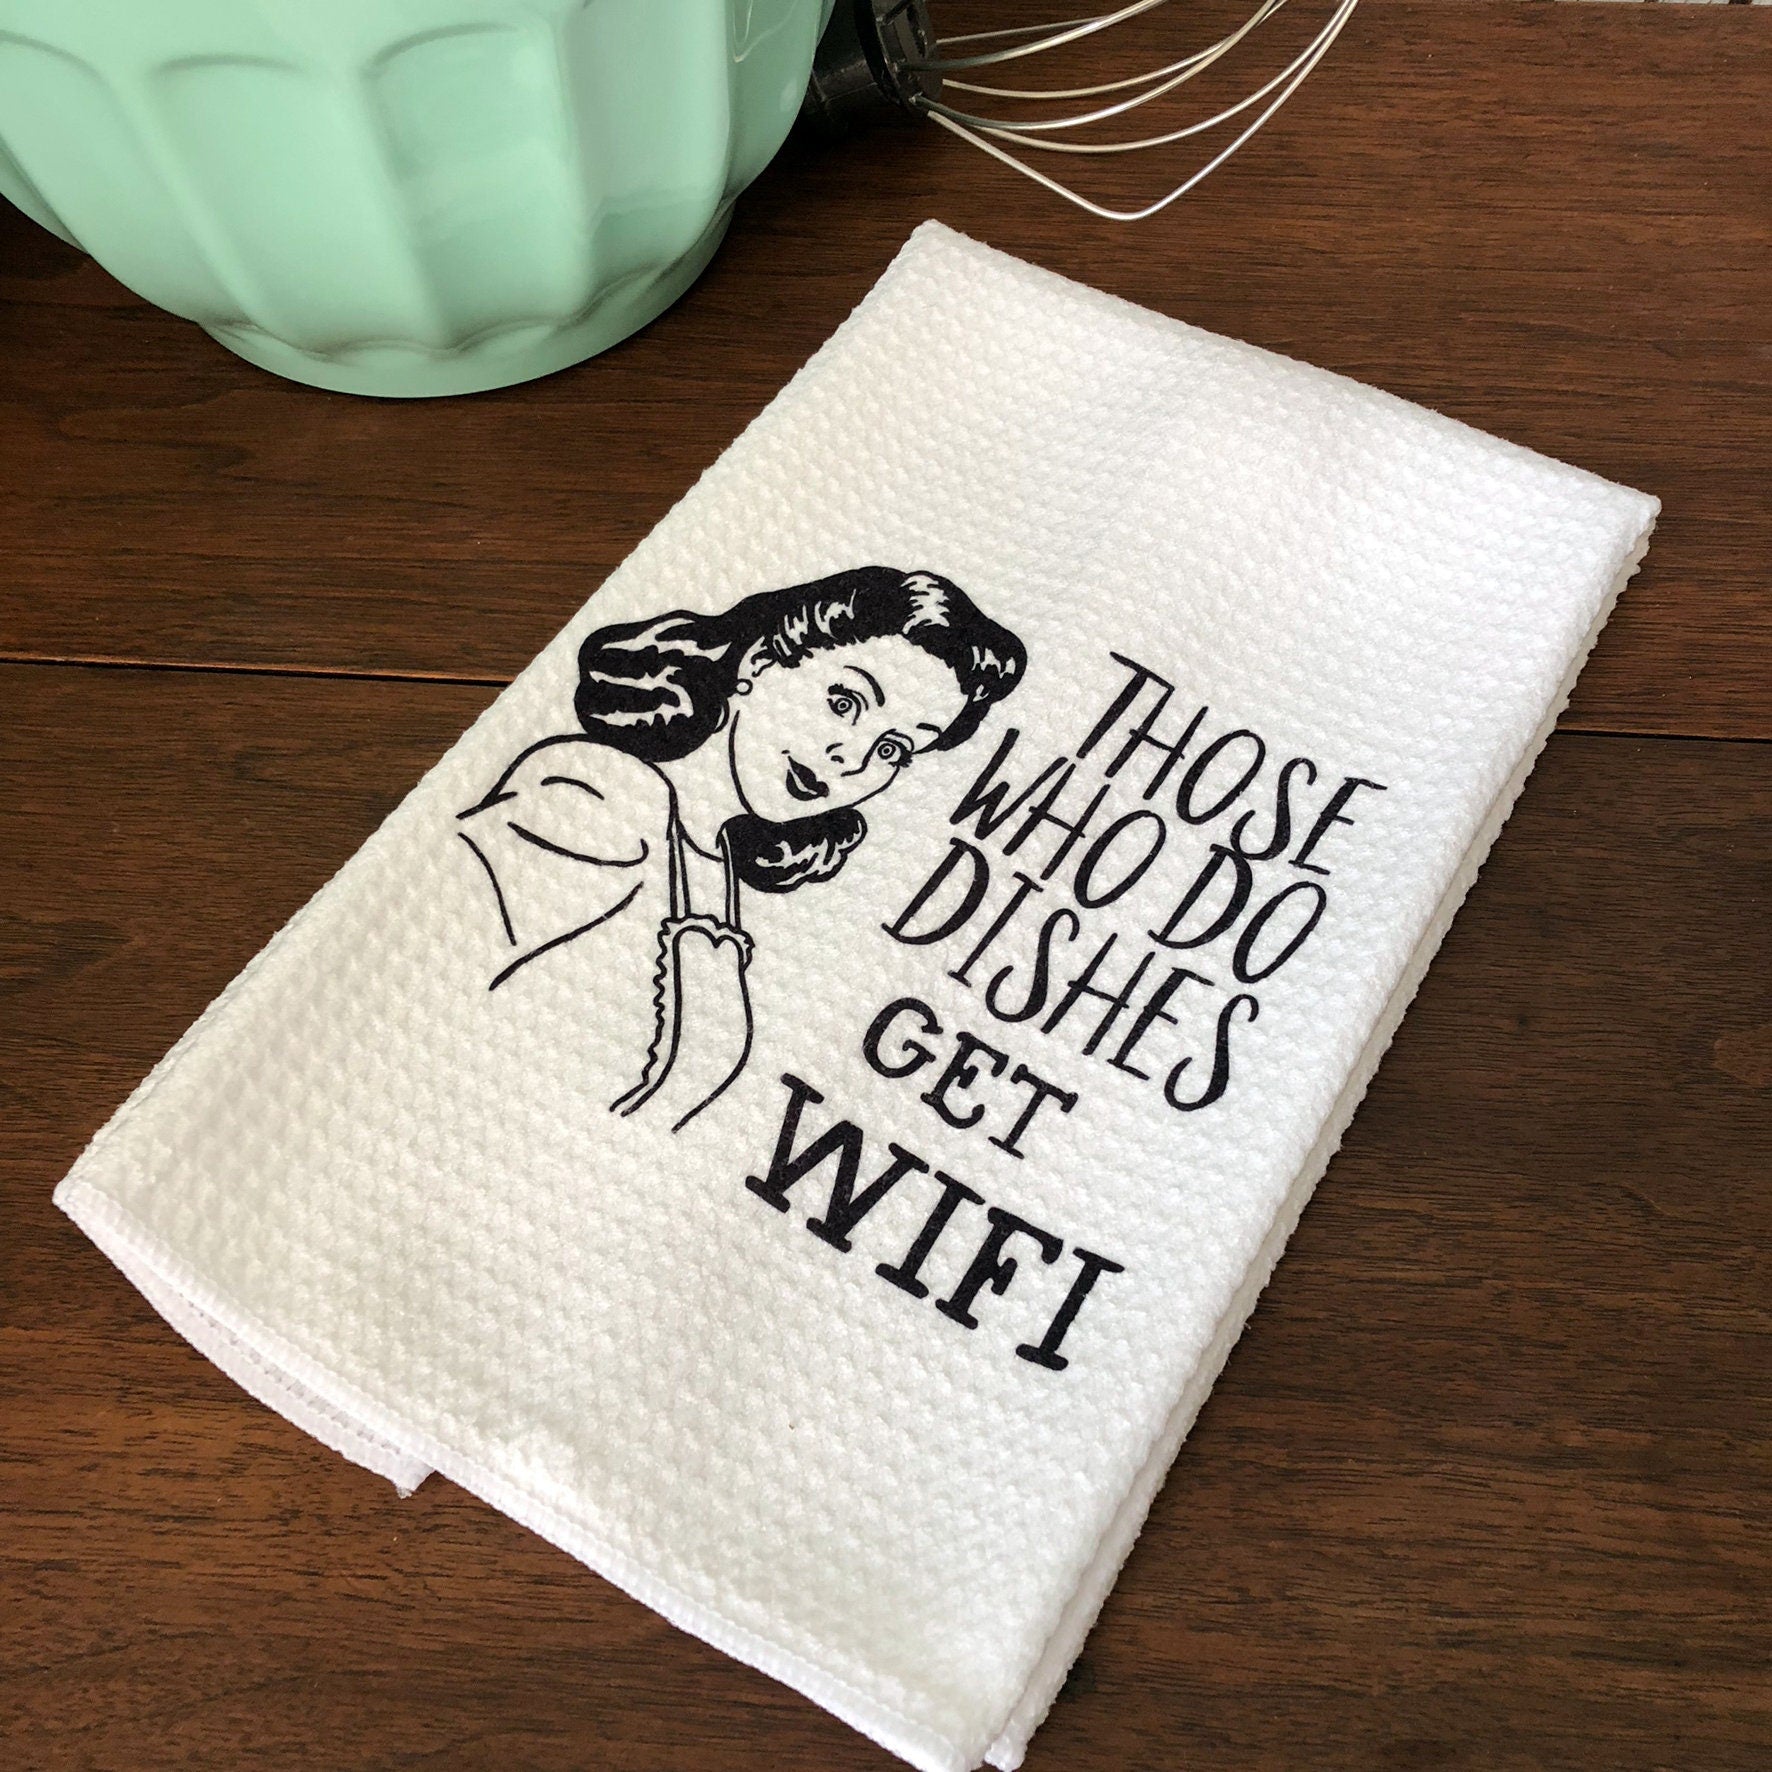 Those Who Do Dishes Get WIFI Dish Towel- Microfiber Dish Towels